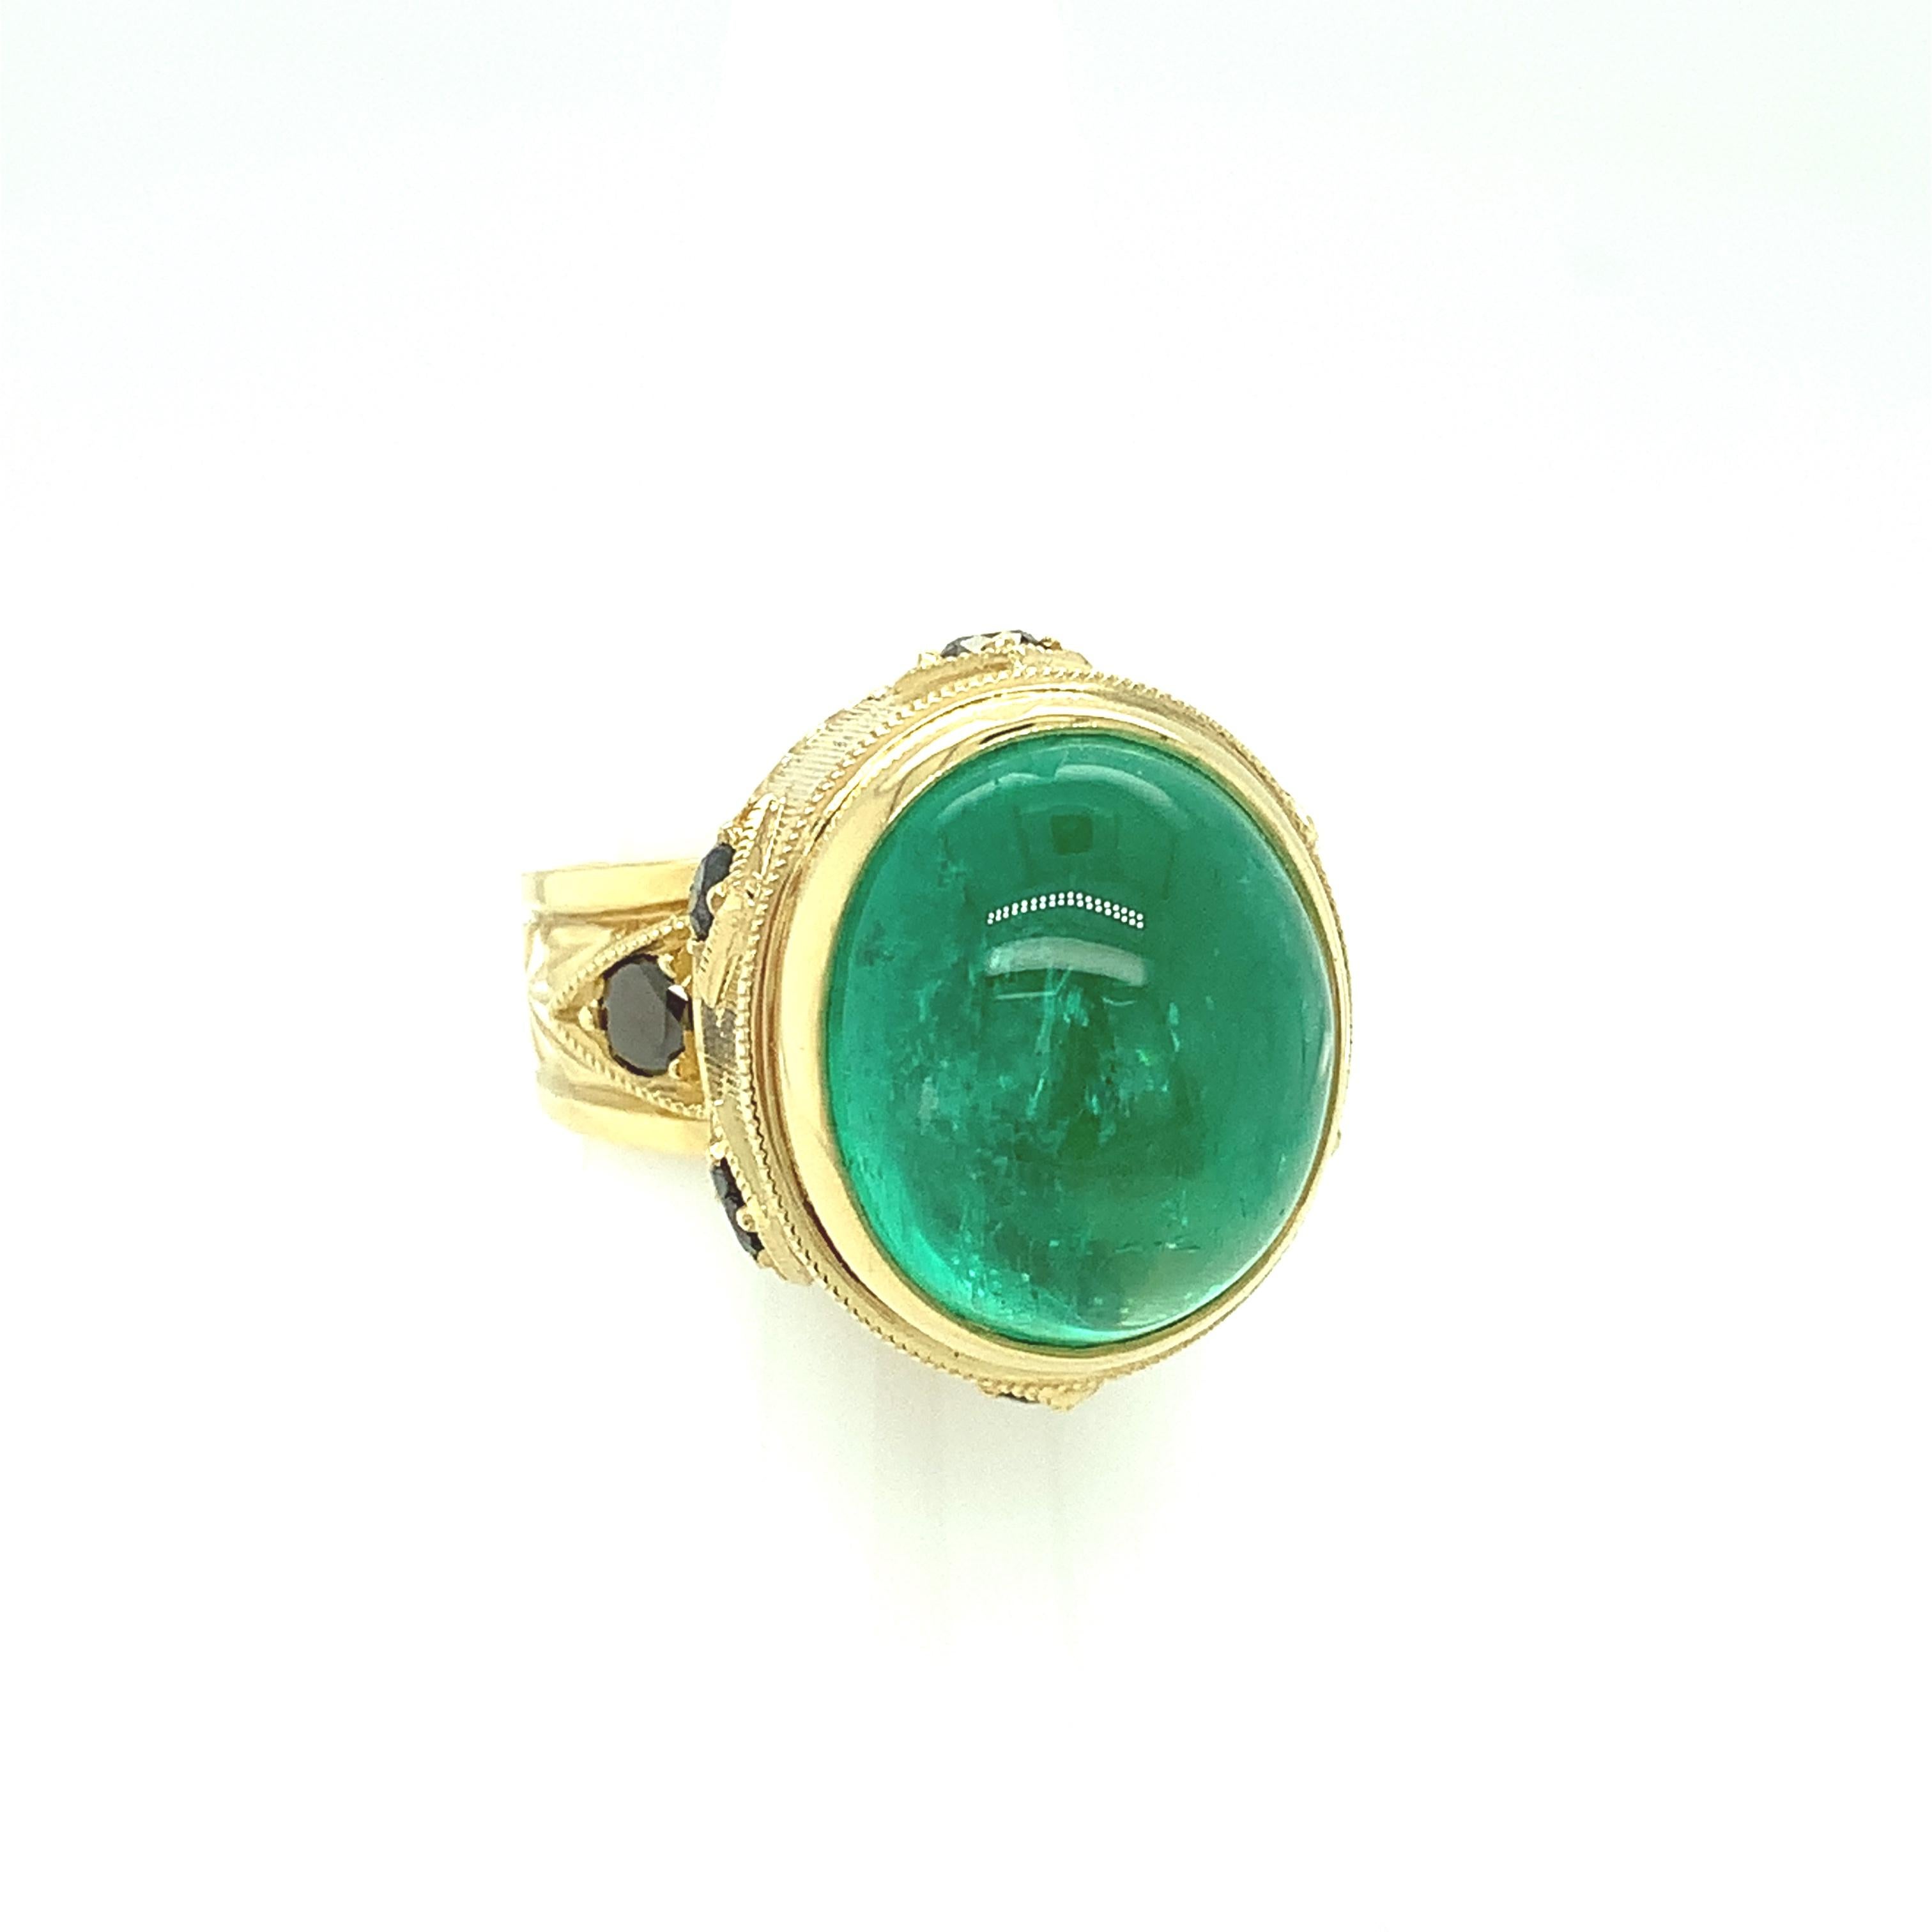 A large, beautifully crystalline, bright green emerald cabochon is featured in this gorgeous 18k yellow gold handmade ring. The ring was custom made for this gemstone in the design of one of our most popular signature styles - a beautiful